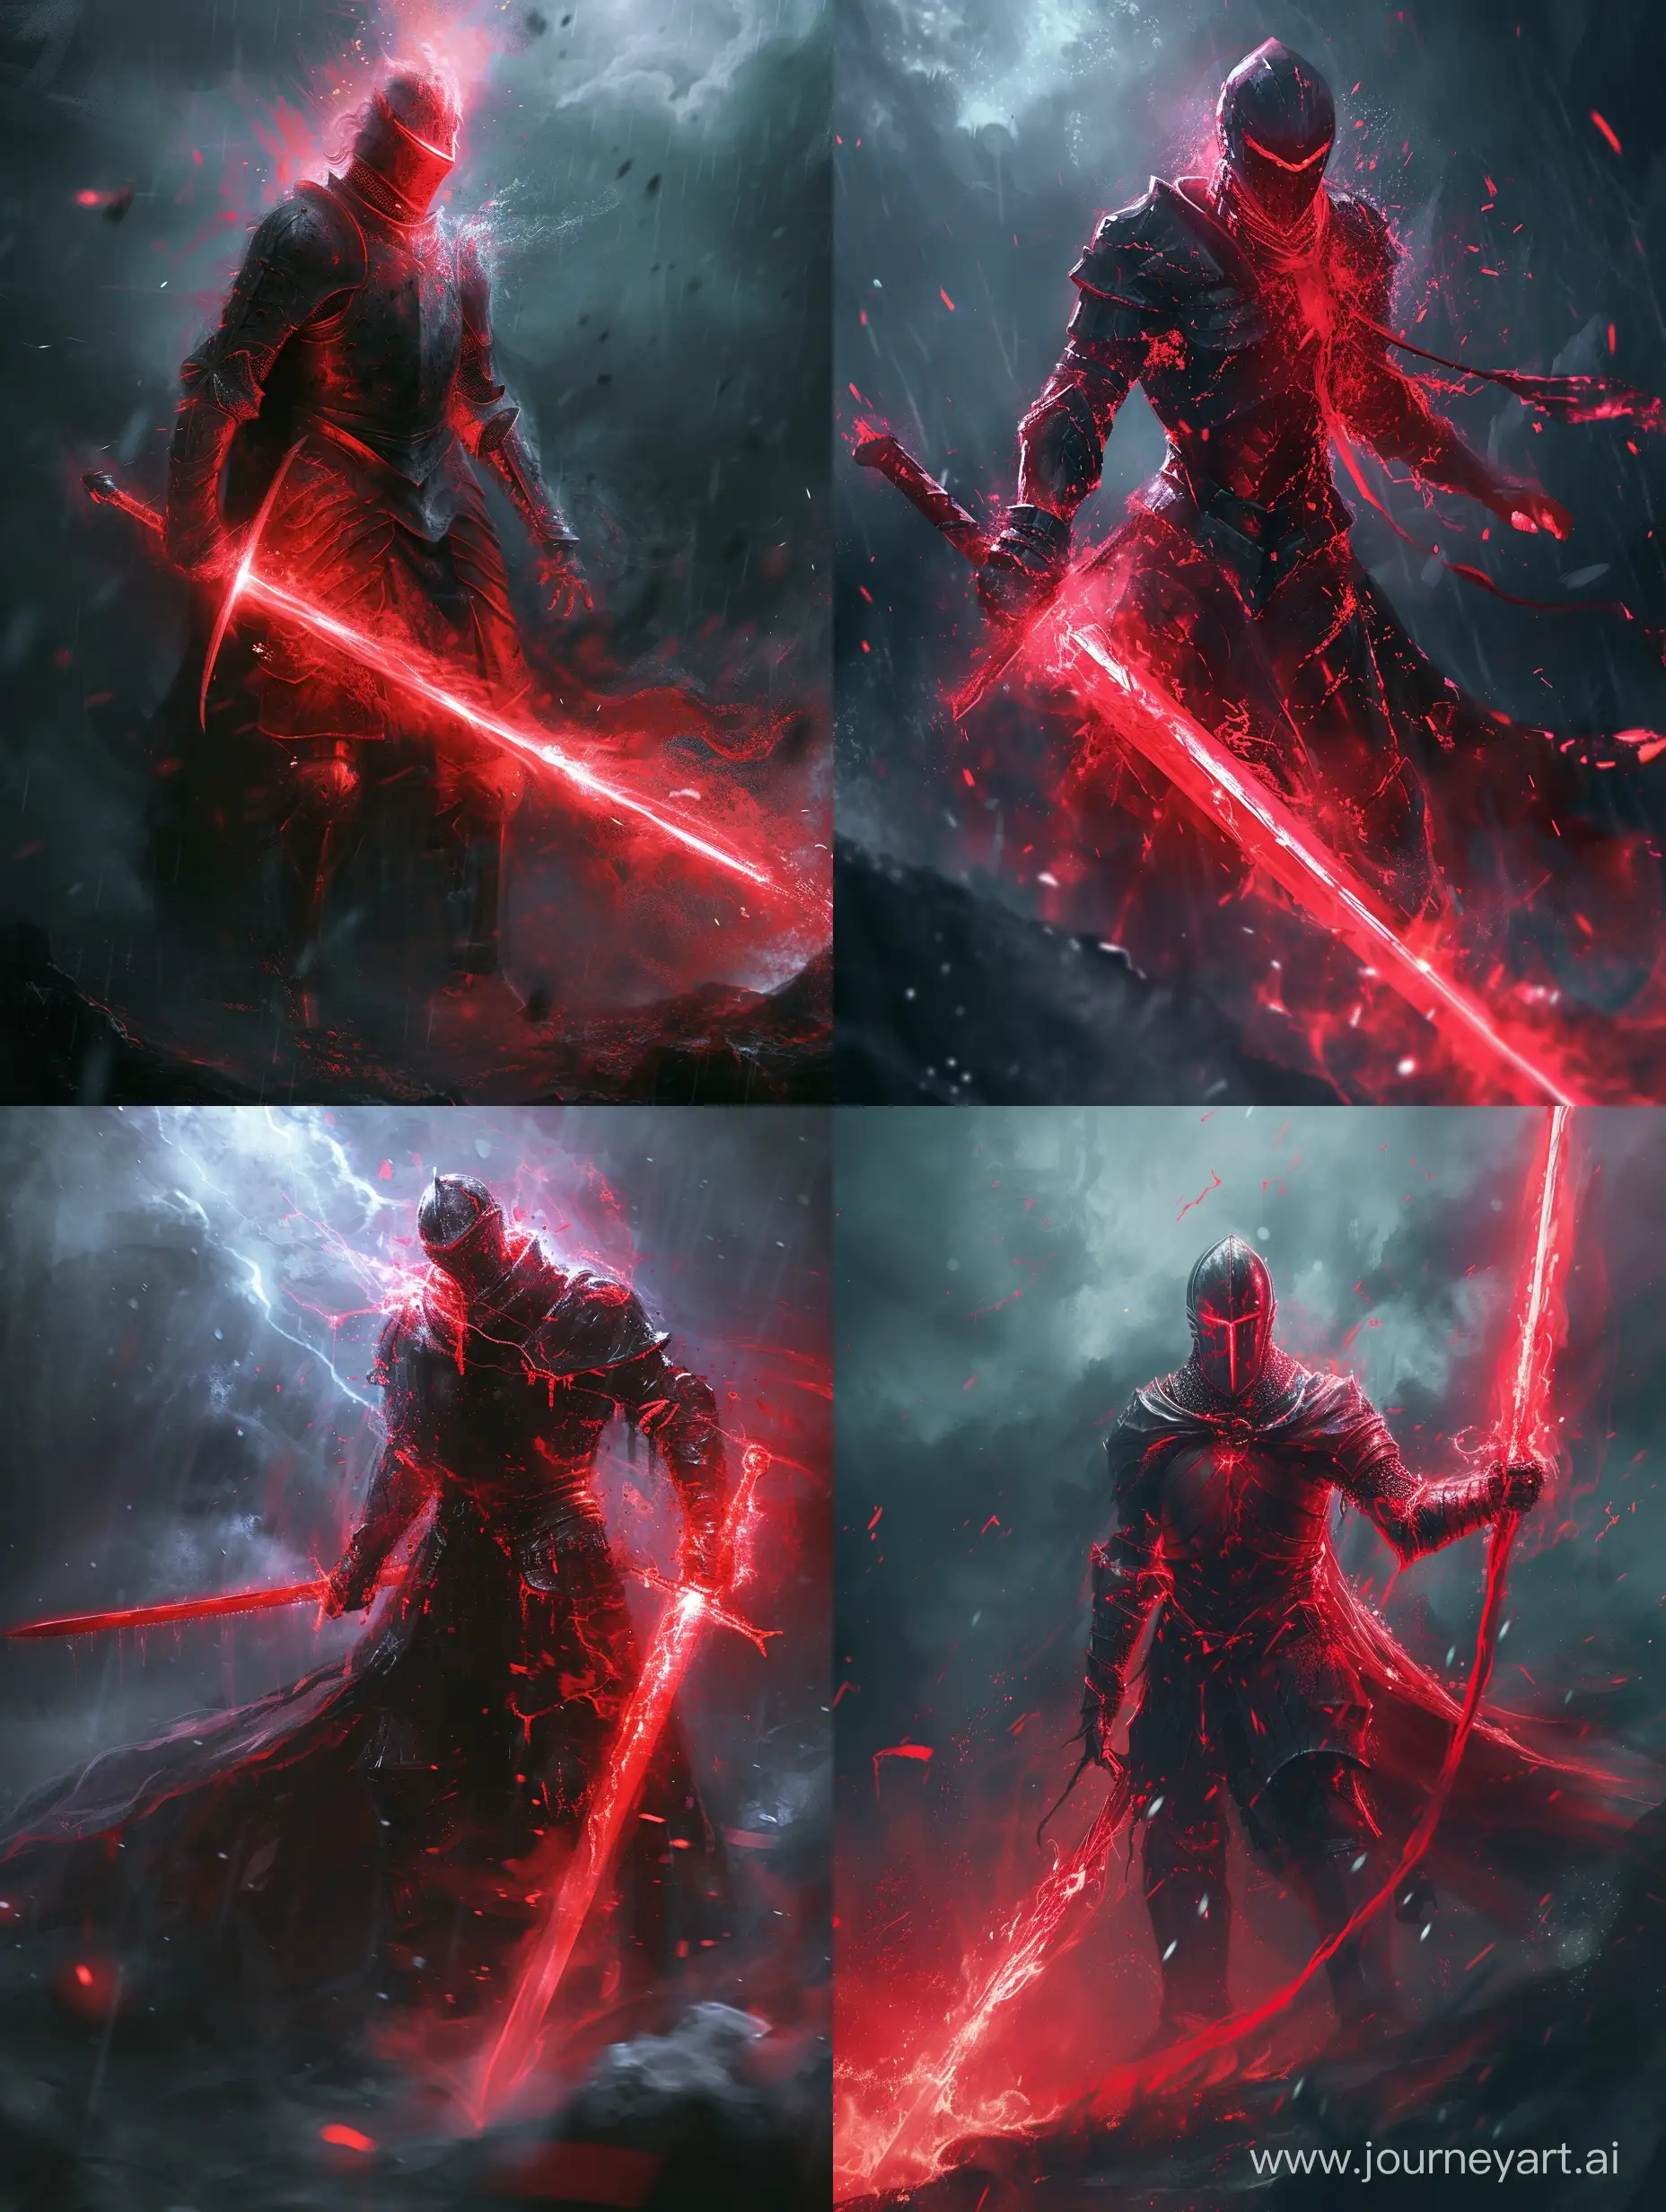 Majestic-Glowing-Red-Knight-with-Crimson-Aura-and-Sword-in-Cinematic-Storm